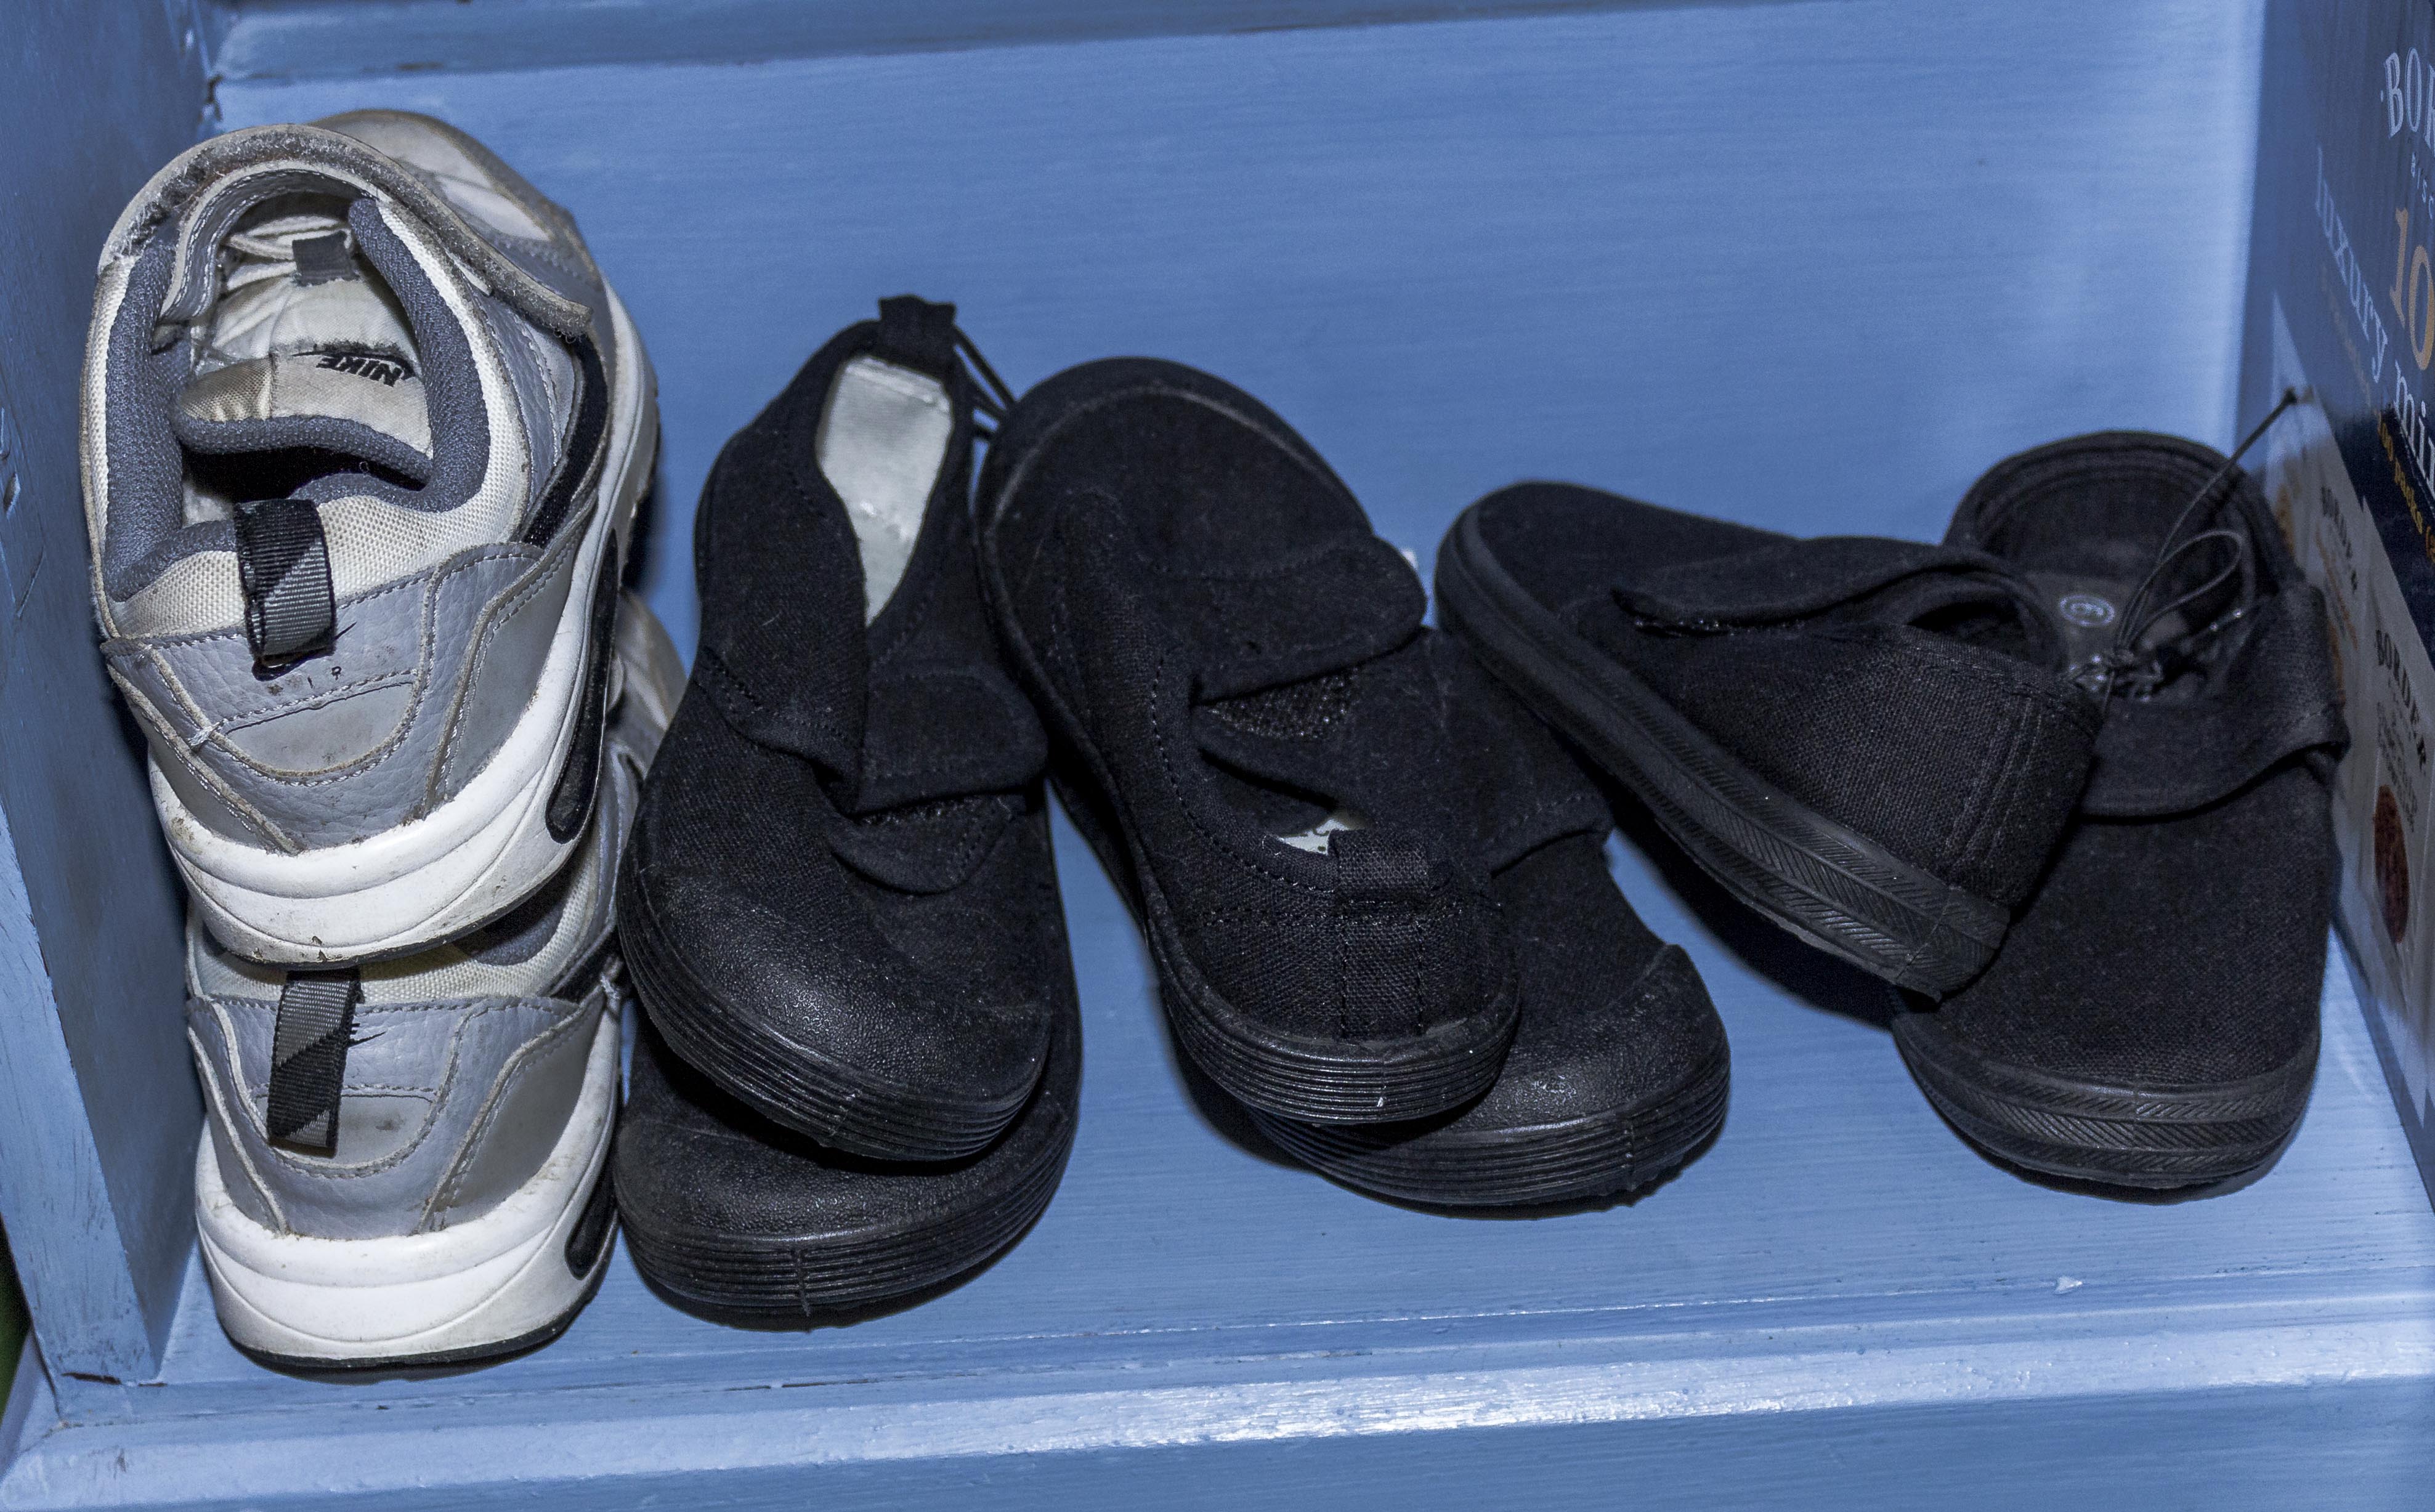 Three pairs of child's plimsolls and a pair of trainers